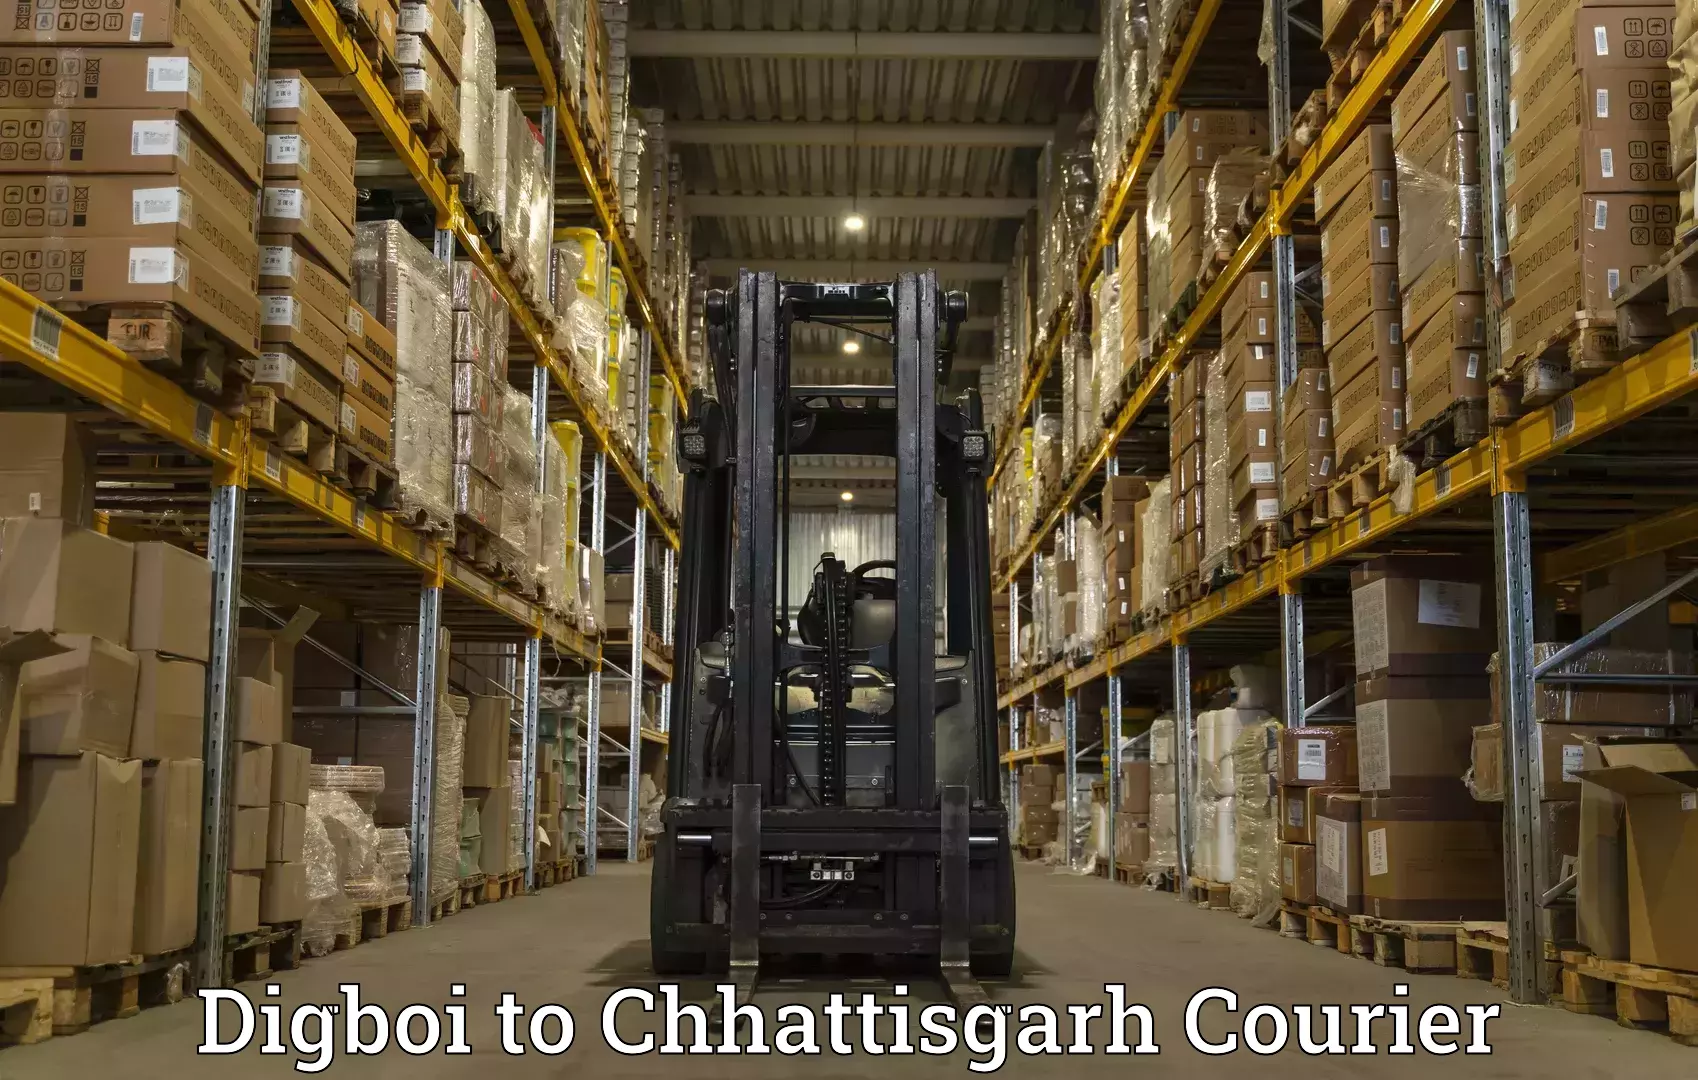 Express delivery network Digboi to Chhattisgarh